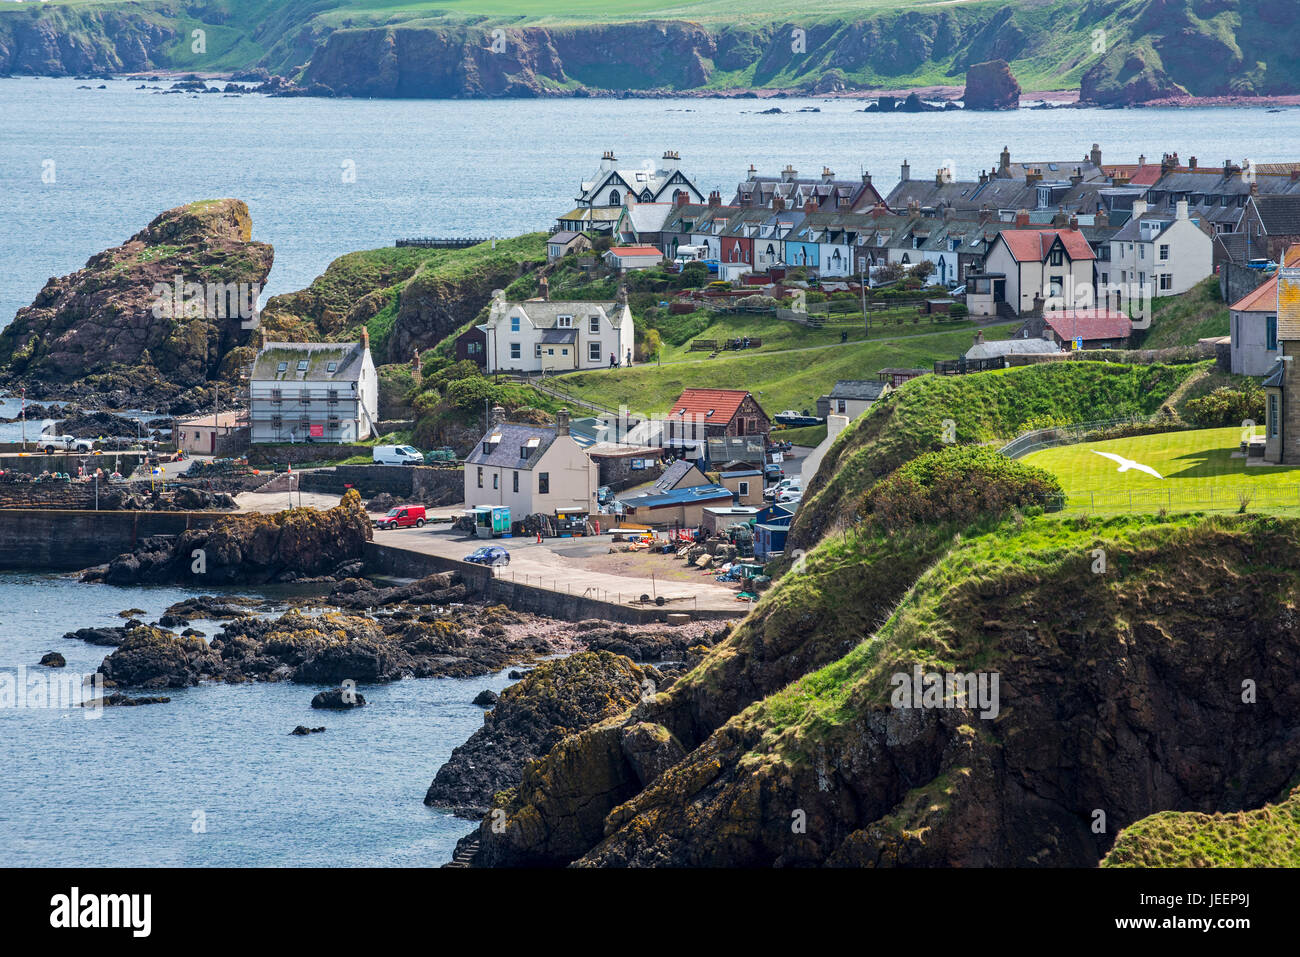 The fishing village of St Abbs seen from the southern side of St Abb's Head, Berwickshire, Scotland, UK Stock Photo